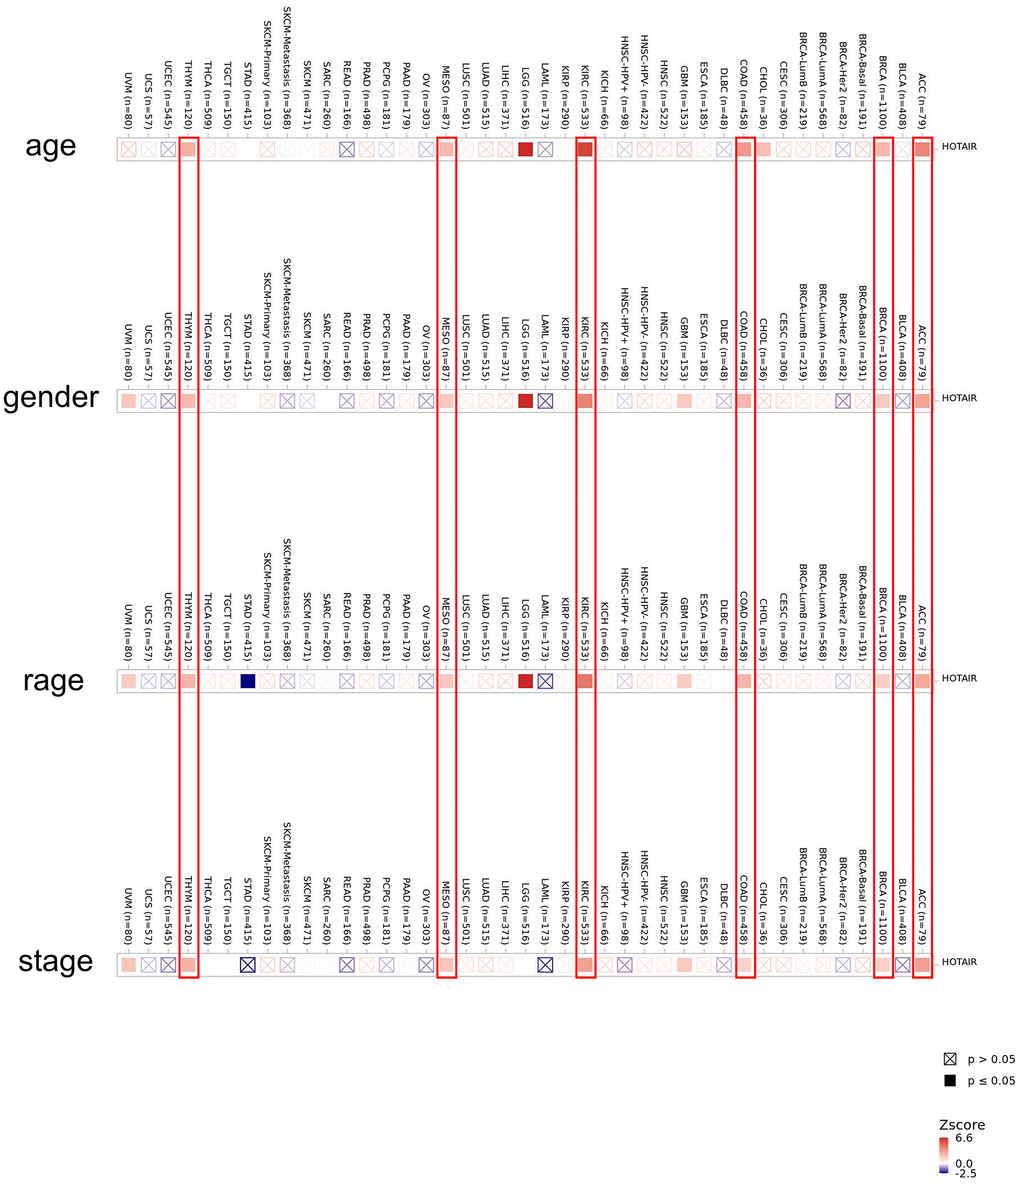 Correlation between HOTAIR expression level and clinicopathological parameters in human cancers including age, gender, race and stage across all tumors in TCGA. The red color indicates a positive correlation (0–1), while the blue color represents a negative correlation (−1–0). The correlation with P-value 